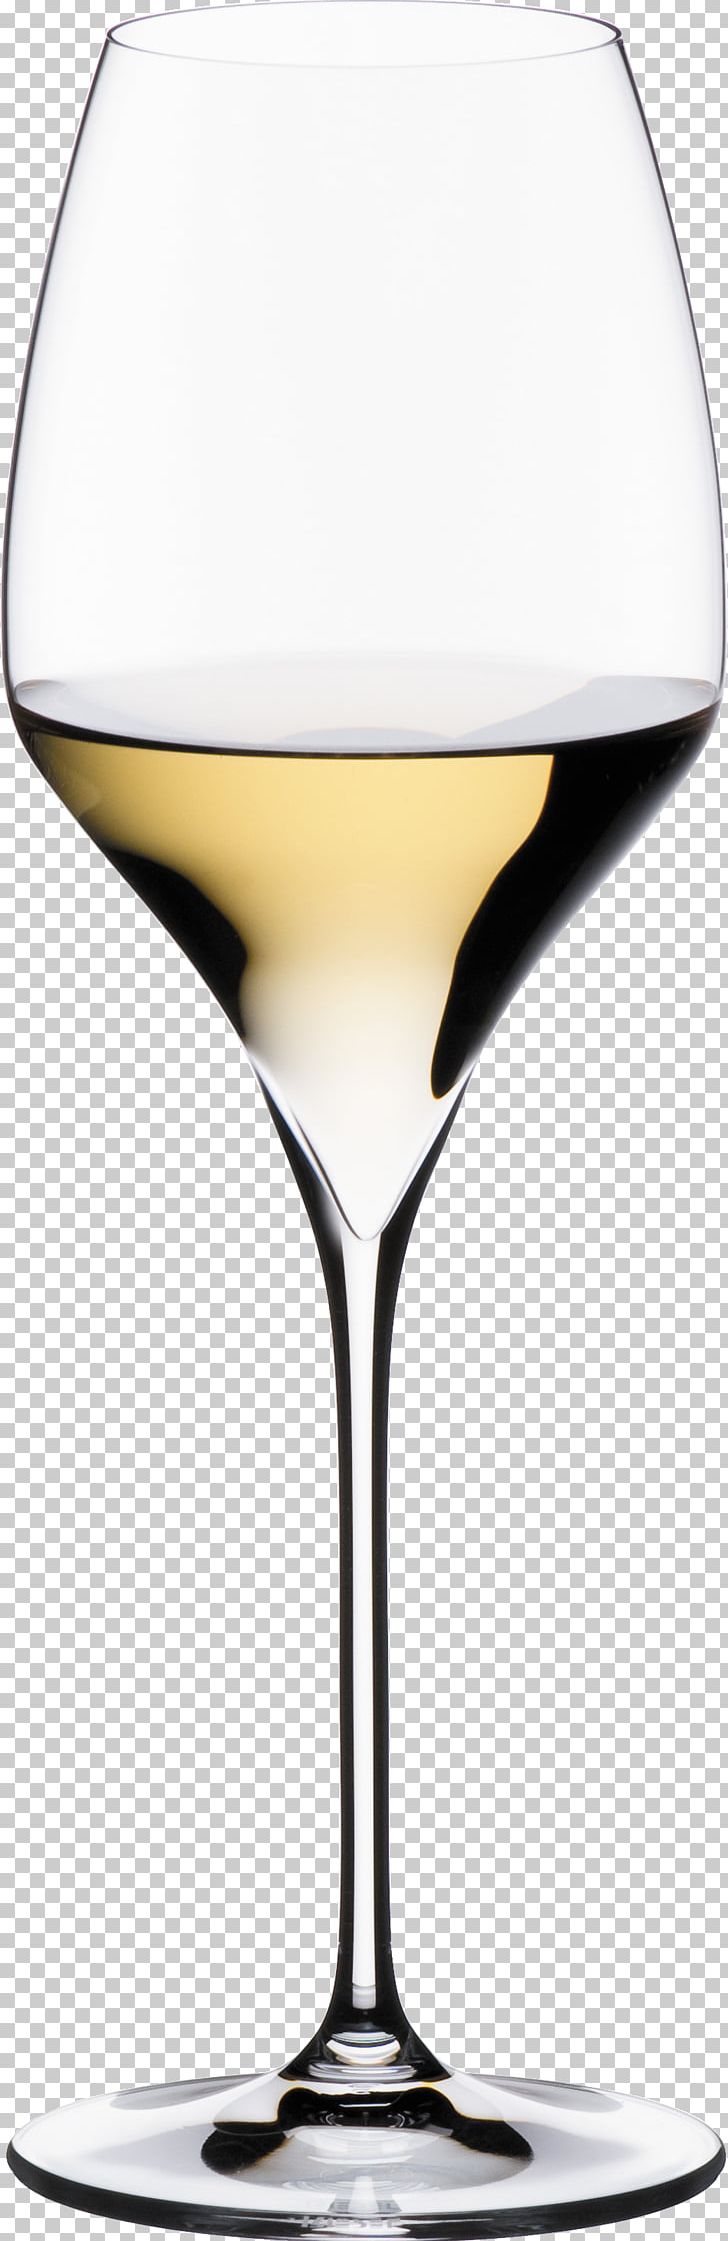 Riesling White Wine Sauvignon Blanc Chardonnay PNG, Clipart, Barware, Beer Glass, Beer Glasses, Champagne Glass, Champagne Stemware Free PNG Download